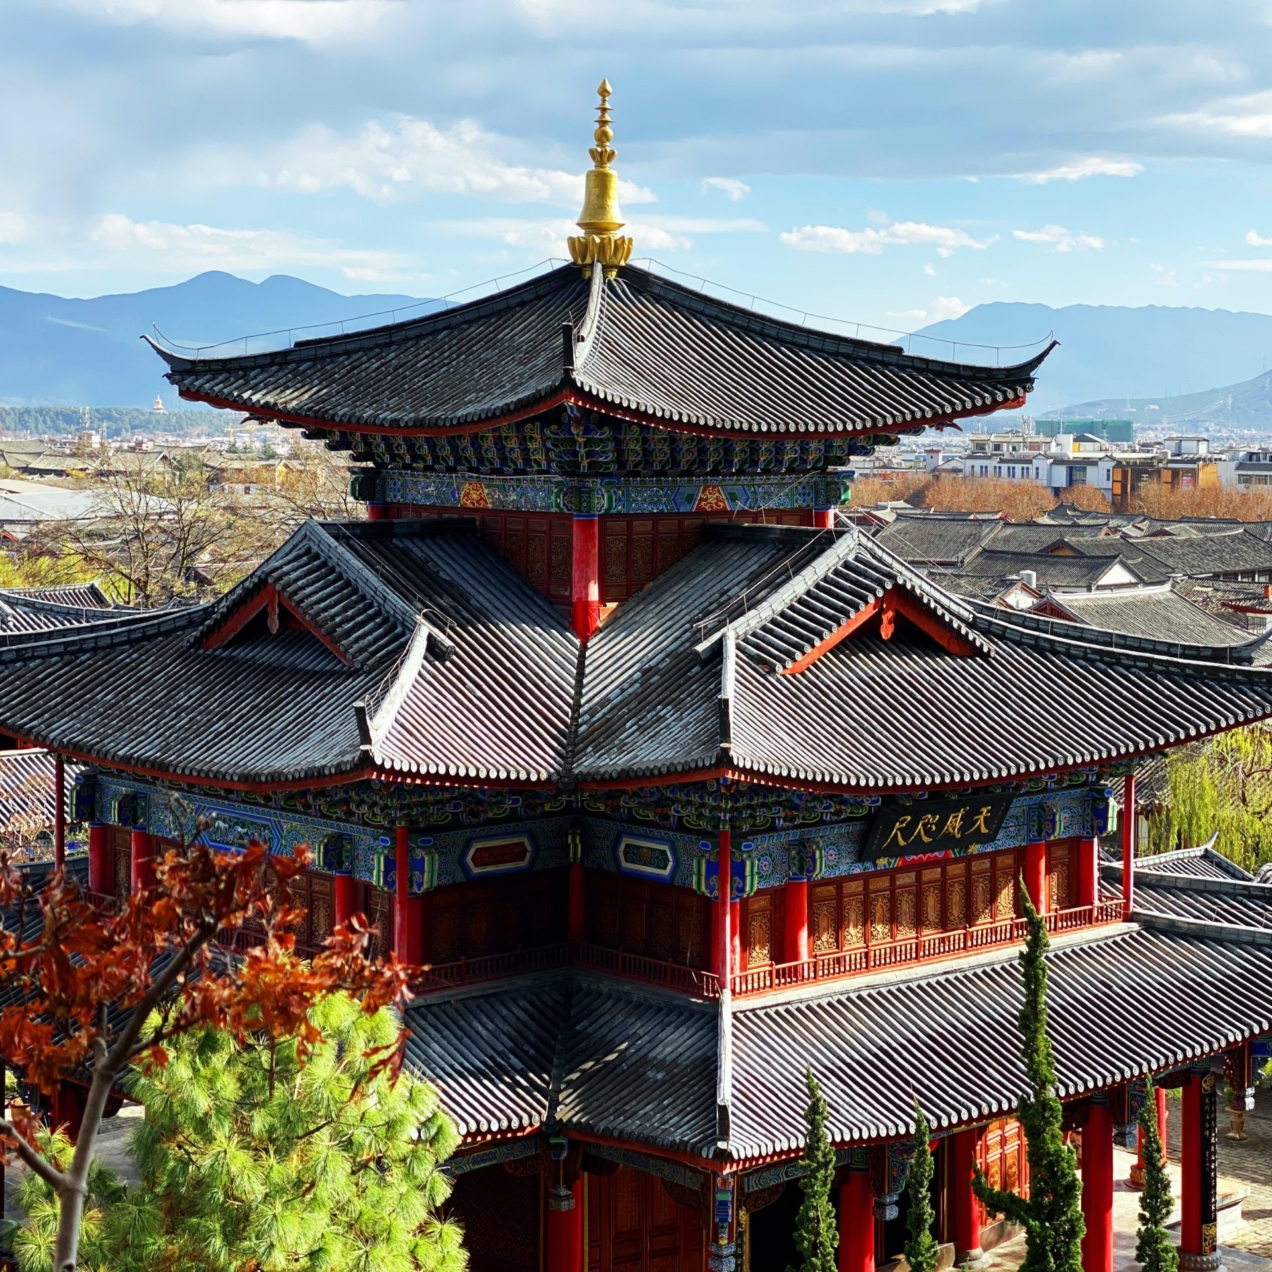 Lijiang: A Timeless Beauty in the Heart of China